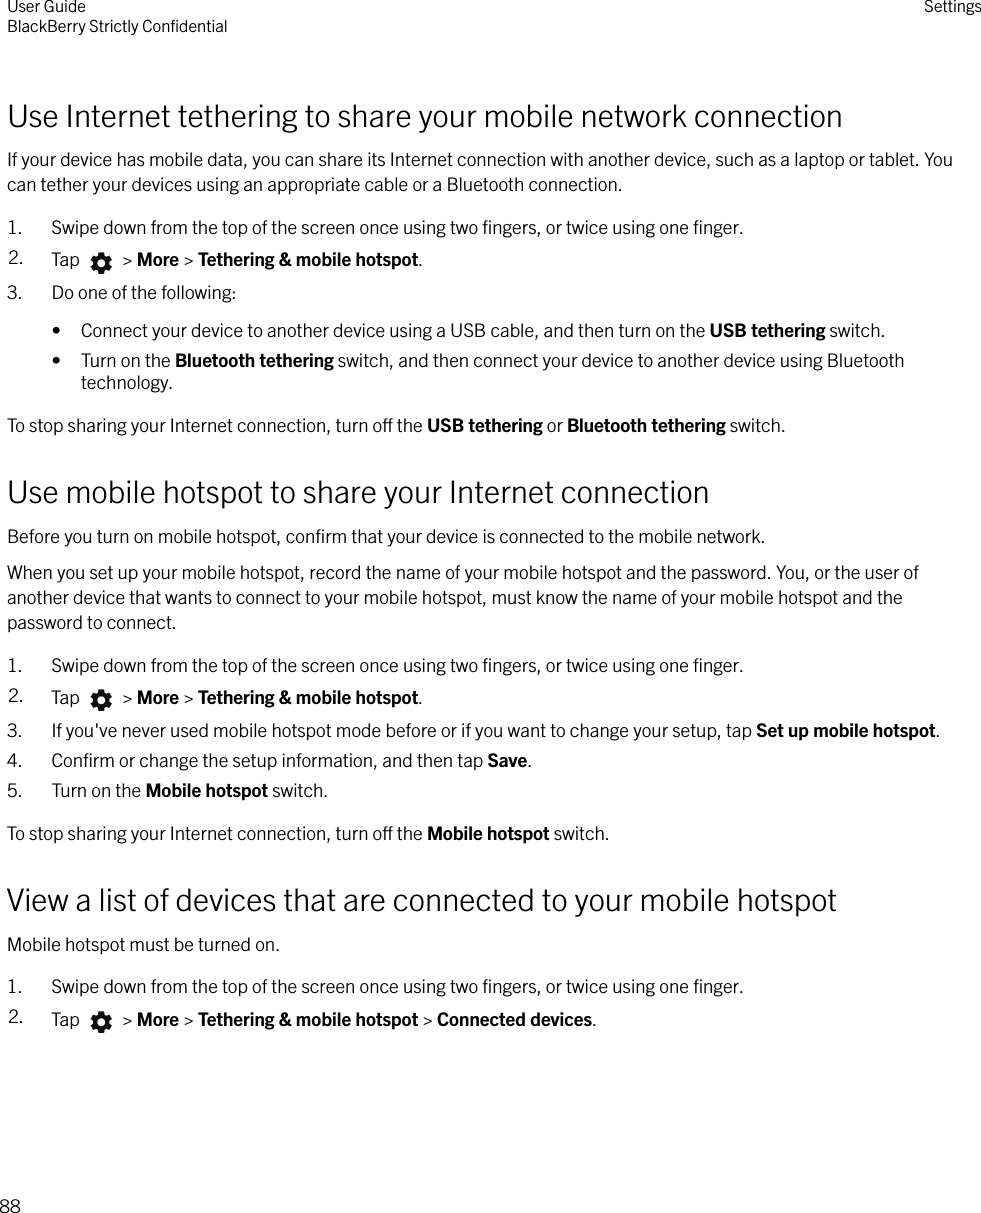 Use Internet tethering to share your mobile network connectionIf your device has mobile data, you can share its Internet connection with another device, such as a laptop or tablet. Youcan tether your devices using an appropriate cable or a Bluetooth connection.1. Swipe down from the top of the screen once using two ﬁngers, or twice using one ﬁnger.2. Tap   &gt; More &gt; Tethering &amp; mobile hotspot.3. Do one of the following:• Connect your device to another device using a USB cable, and then turn on the USB tethering switch.• Turn on the Bluetooth tethering switch, and then connect your device to another device using Bluetoothtechnology.To stop sharing your Internet connection, turn o the USB tethering or Bluetooth tethering switch.Use mobile hotspot to share your Internet connectionBefore you turn on mobile hotspot, conﬁrm that your device is connected to the mobile network.When you set up your mobile hotspot, record the name of your mobile hotspot and the password. You, or the user ofanother device that wants to connect to your mobile hotspot, must know the name of your mobile hotspot and thepassword to connect.1. Swipe down from the top of the screen once using two ﬁngers, or twice using one ﬁnger.2. Tap   &gt; More &gt; Tethering &amp; mobile hotspot.3. If you&apos;ve never used mobile hotspot mode before or if you want to change your setup, tap Set up mobile hotspot.4. Conﬁrm or change the setup information, and then tap Save.5. Turn on the Mobile hotspot switch.To stop sharing your Internet connection, turn o the Mobile hotspot switch.View a list of devices that are connected to your mobile hotspotMobile hotspot must be turned on.1. Swipe down from the top of the screen once using two ﬁngers, or twice using one ﬁnger.2. Tap   &gt; More &gt; Tethering &amp; mobile hotspot &gt; Connected devices.User GuideBlackBerry Strictly ConﬁdentialSettings88